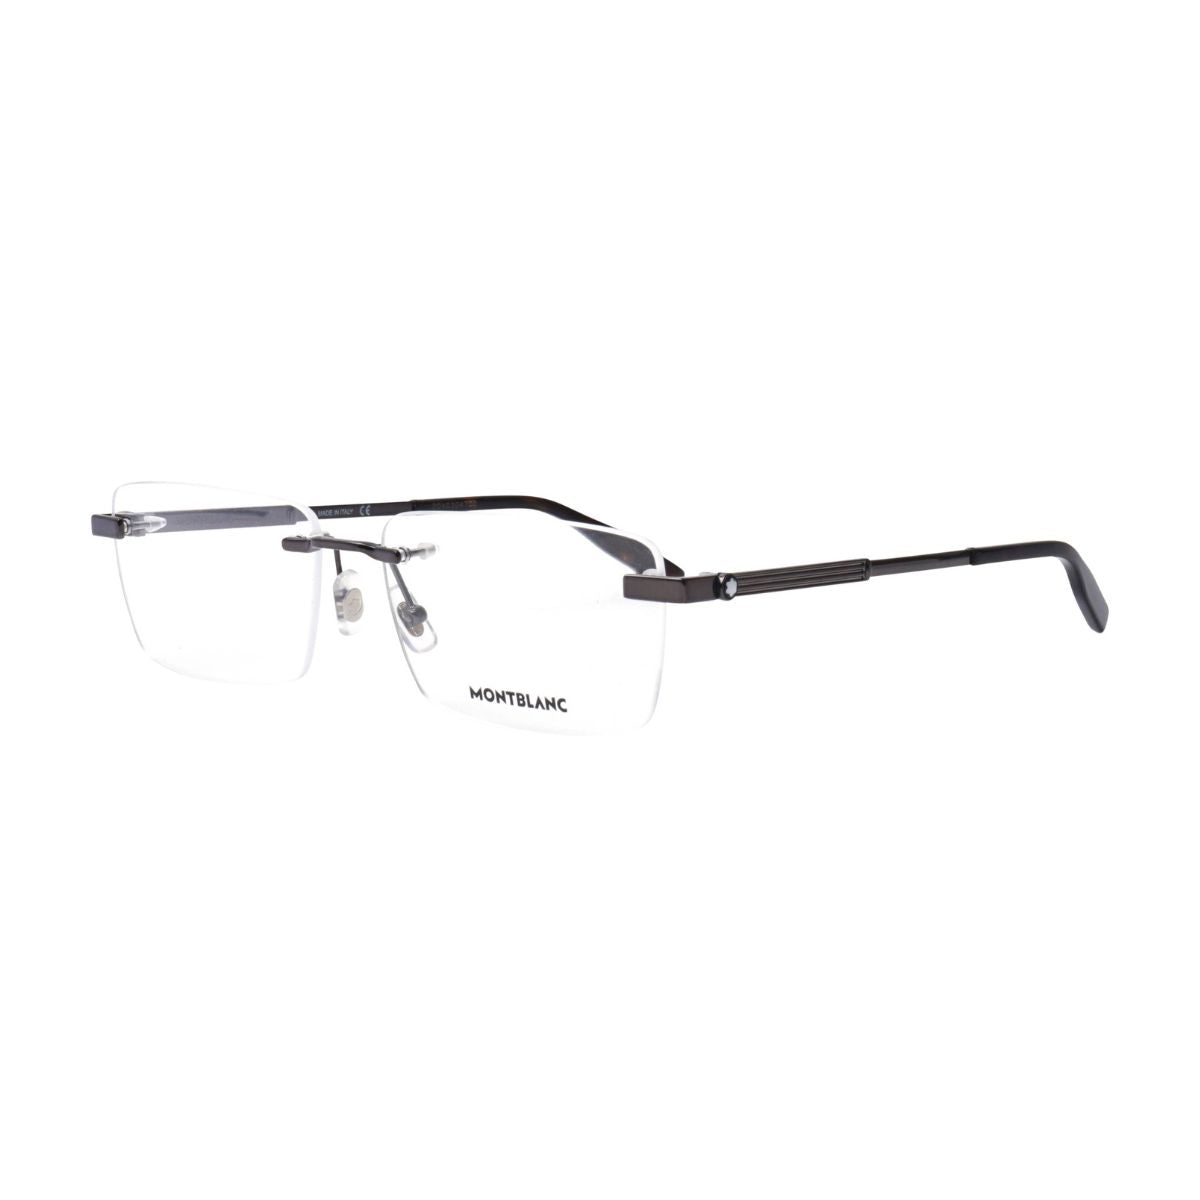 "buy Montblanc 0030O 001 spactacle glasses frame for men's at optorium"